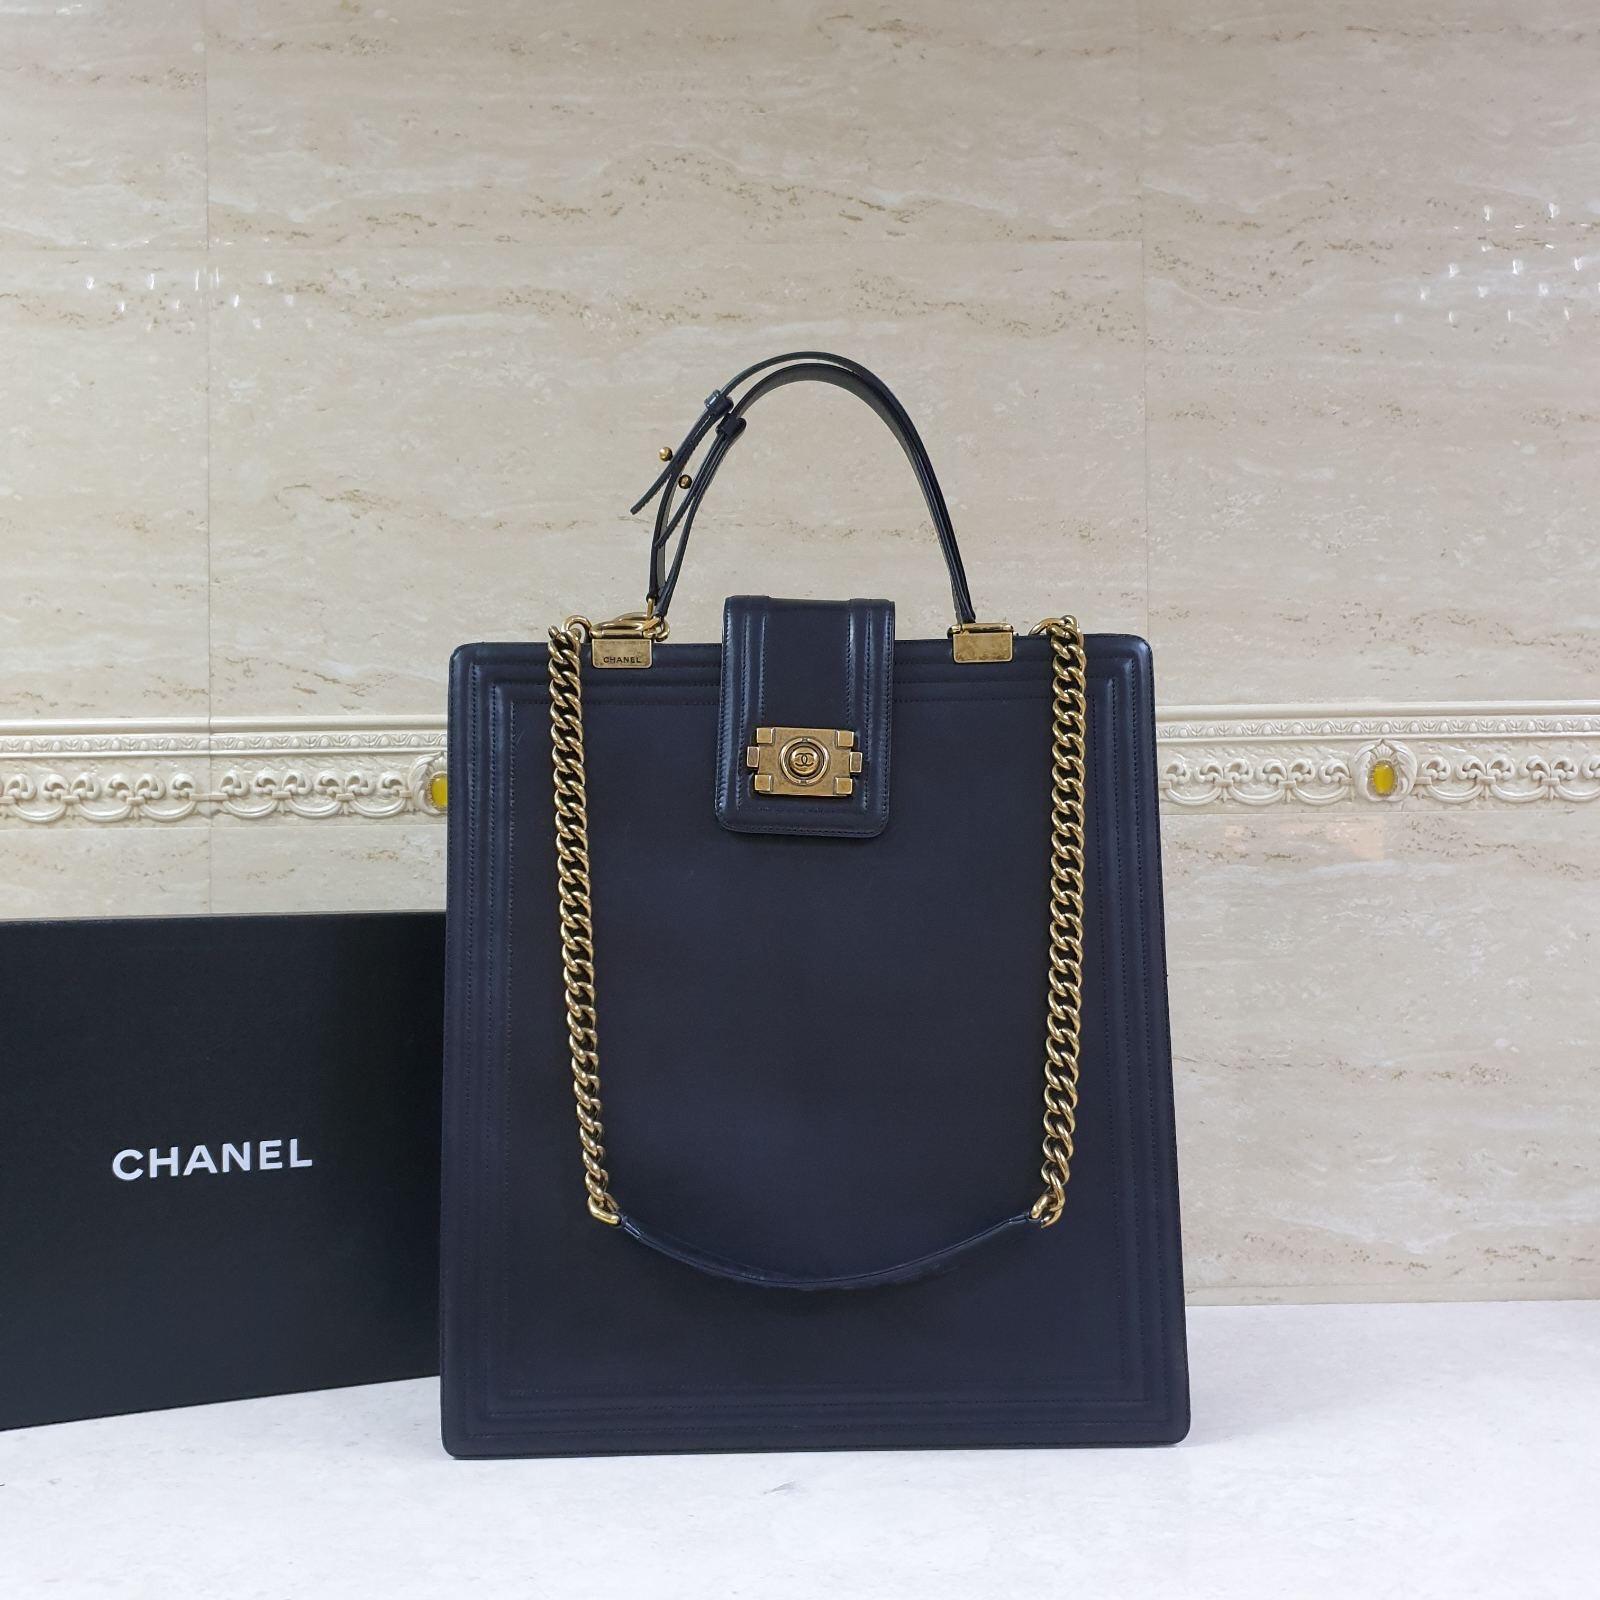 Chanel Boy North to South Black Leather Tote Bag 5